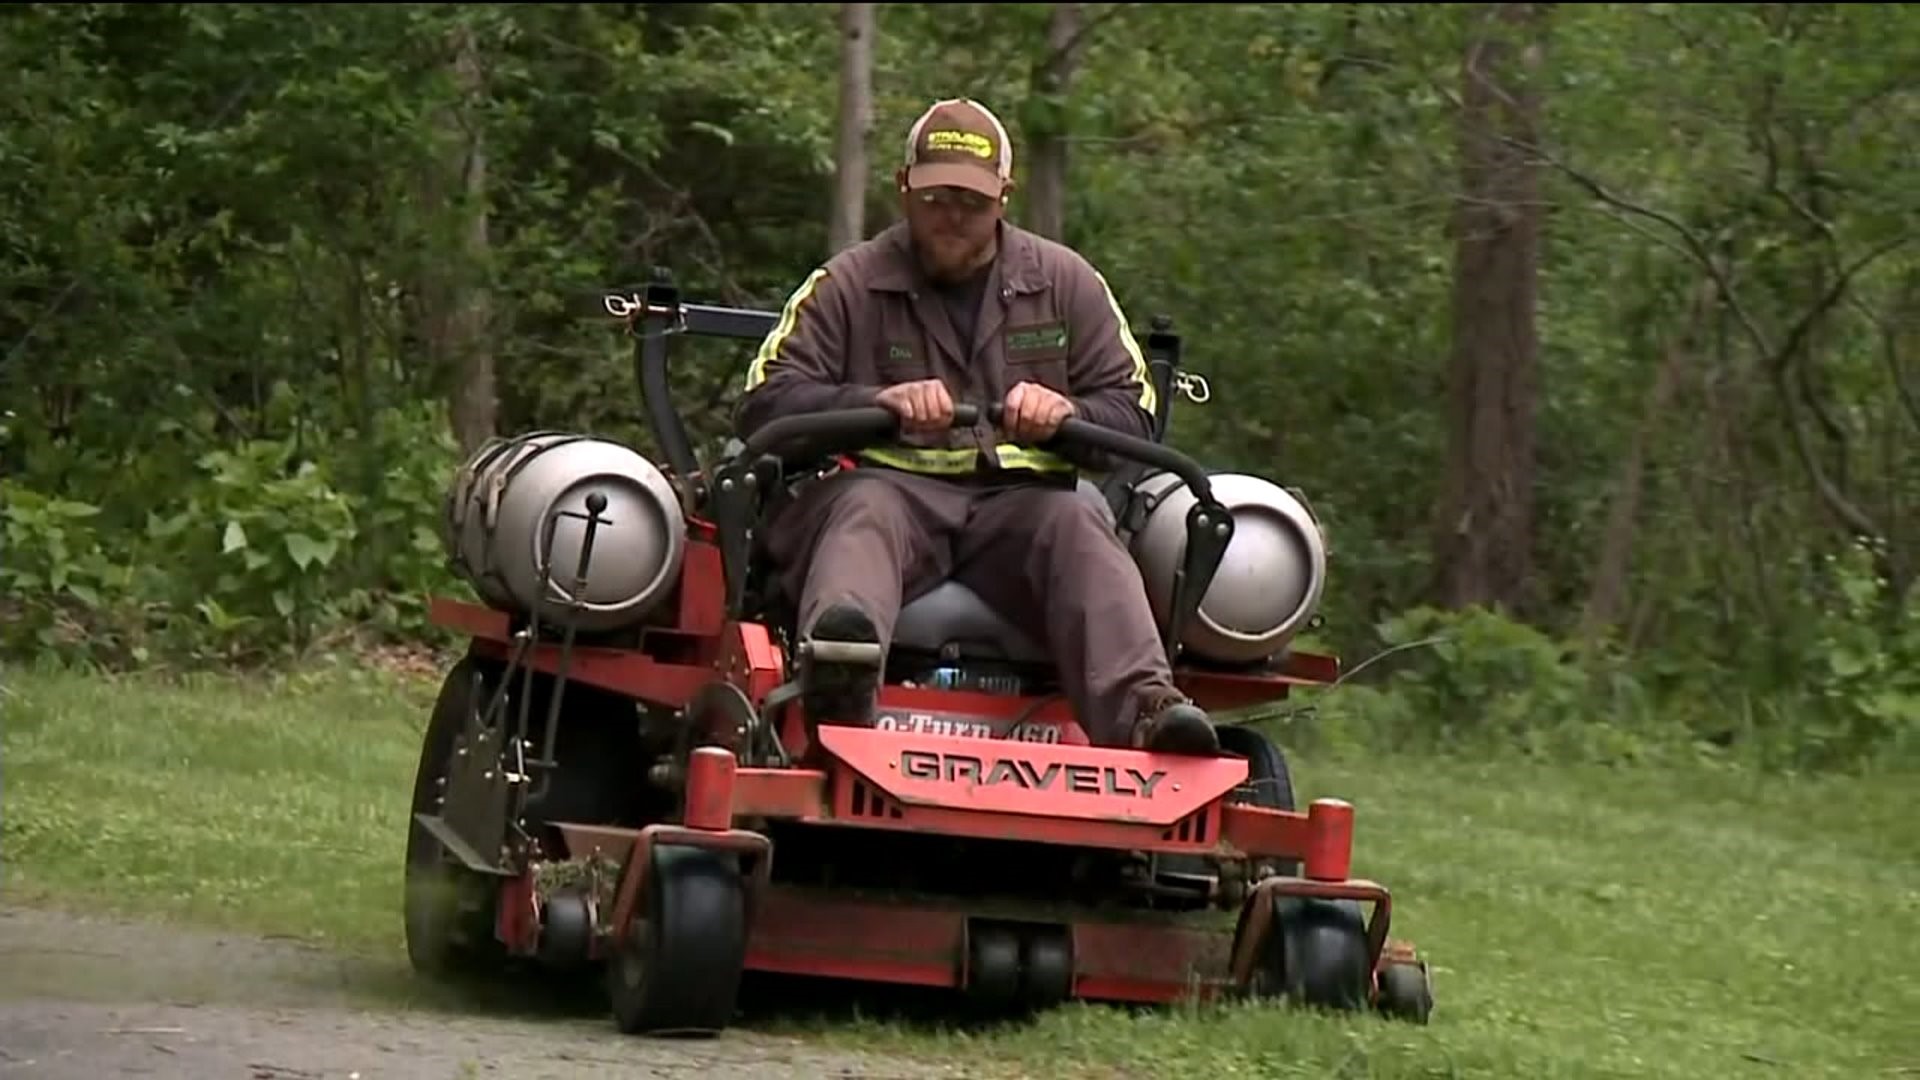 Landscapers Mow Through Bad Weather